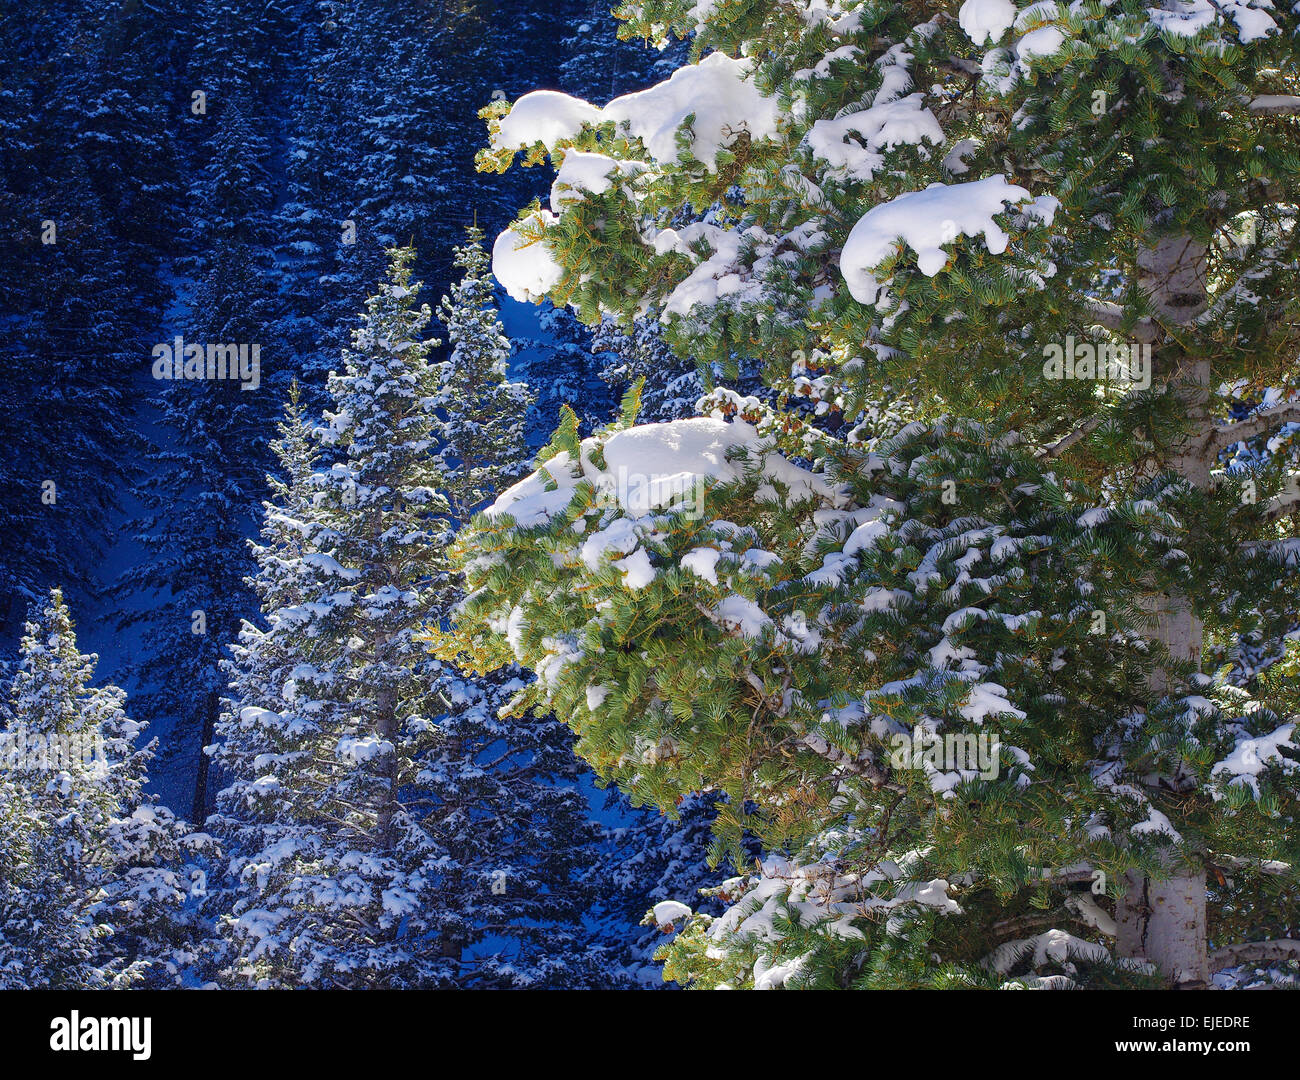 Snow on pine trees, Wasatch mountains, Utah, the United States. Stock Photo